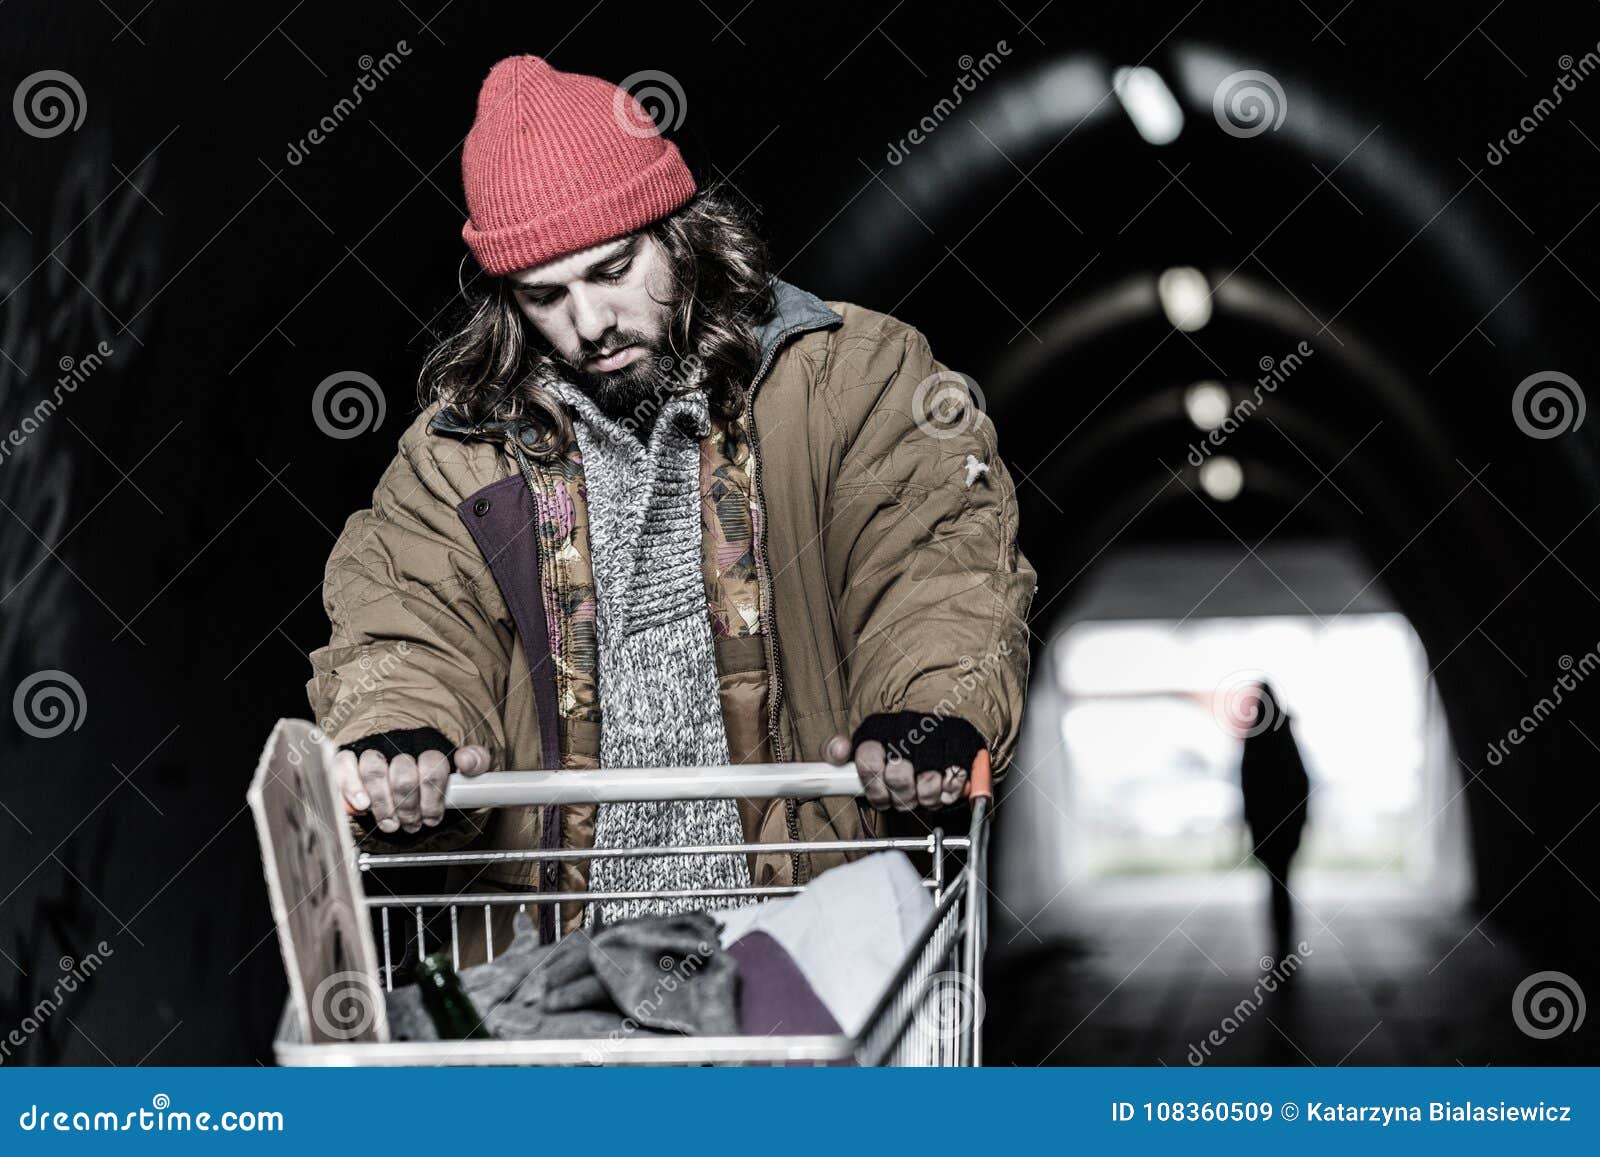 hopeless drifter with trolley